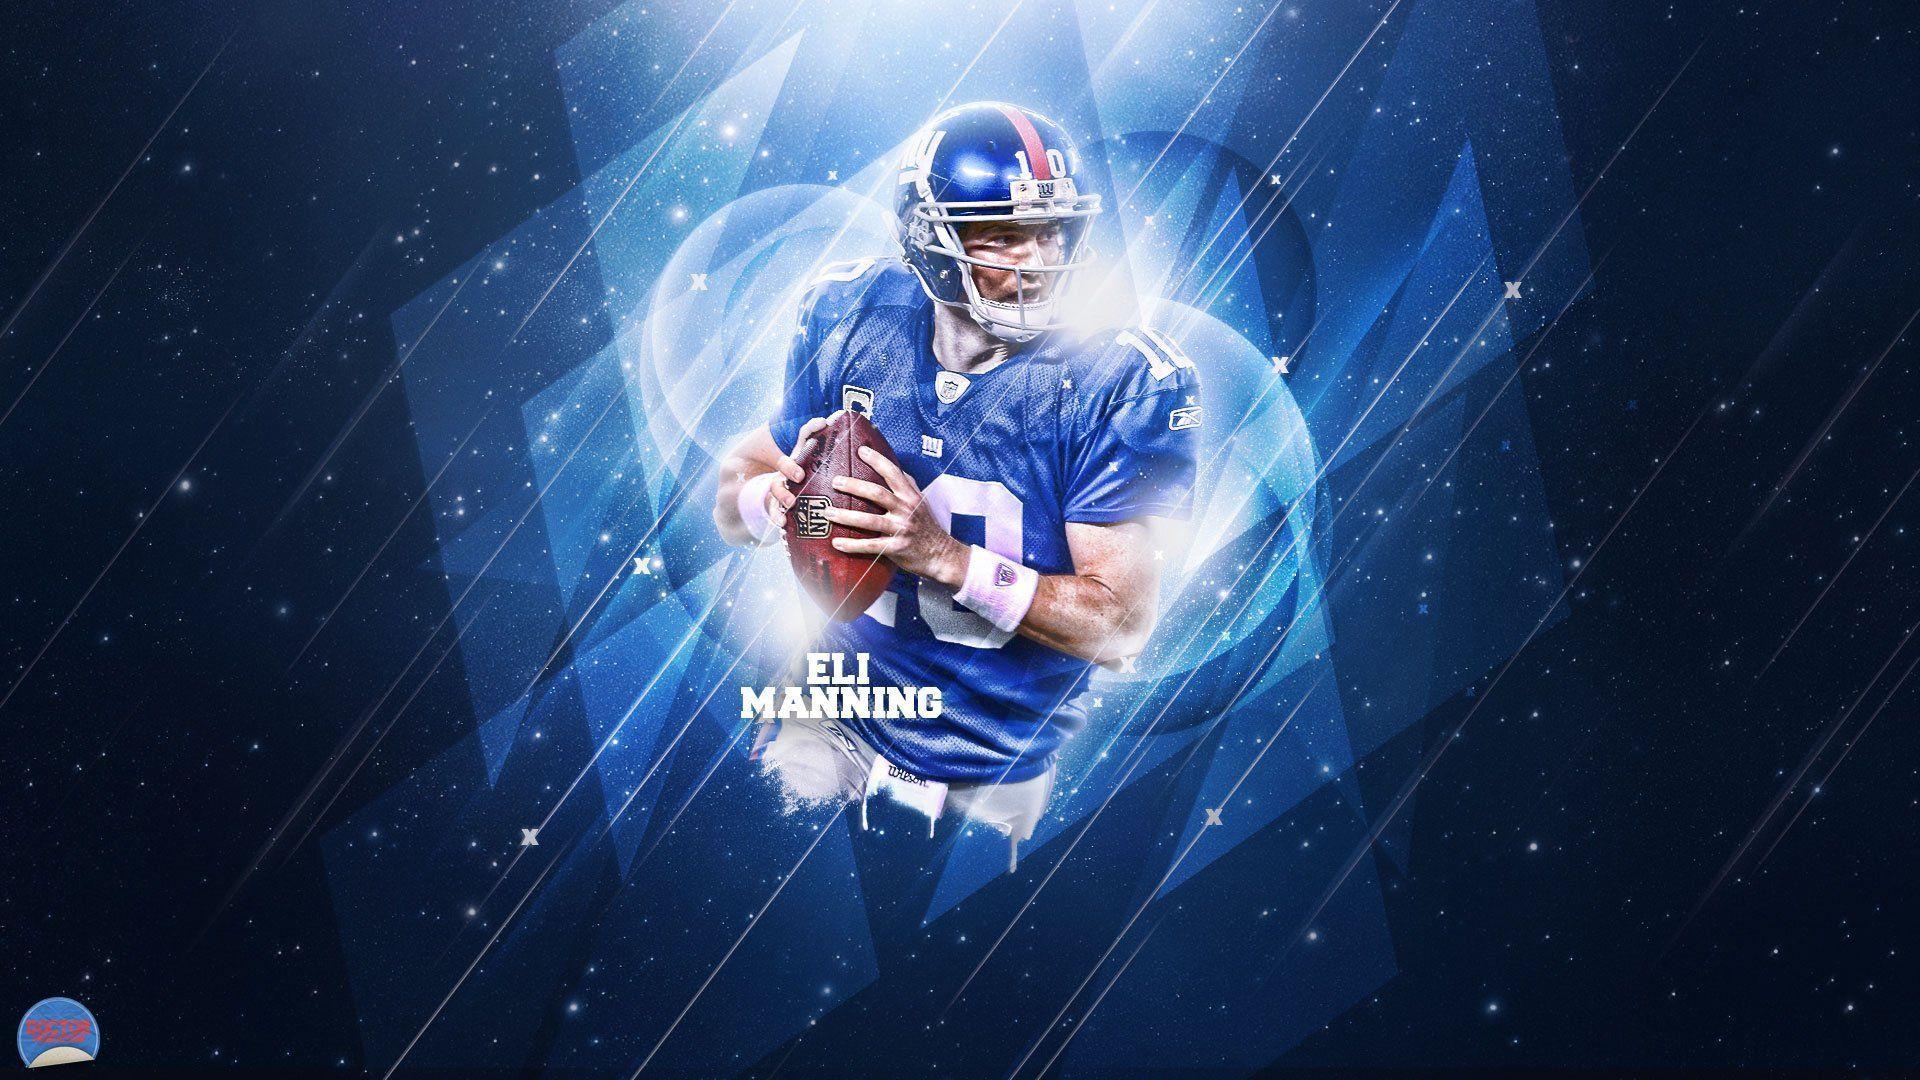 Ny Giant Wallpapers